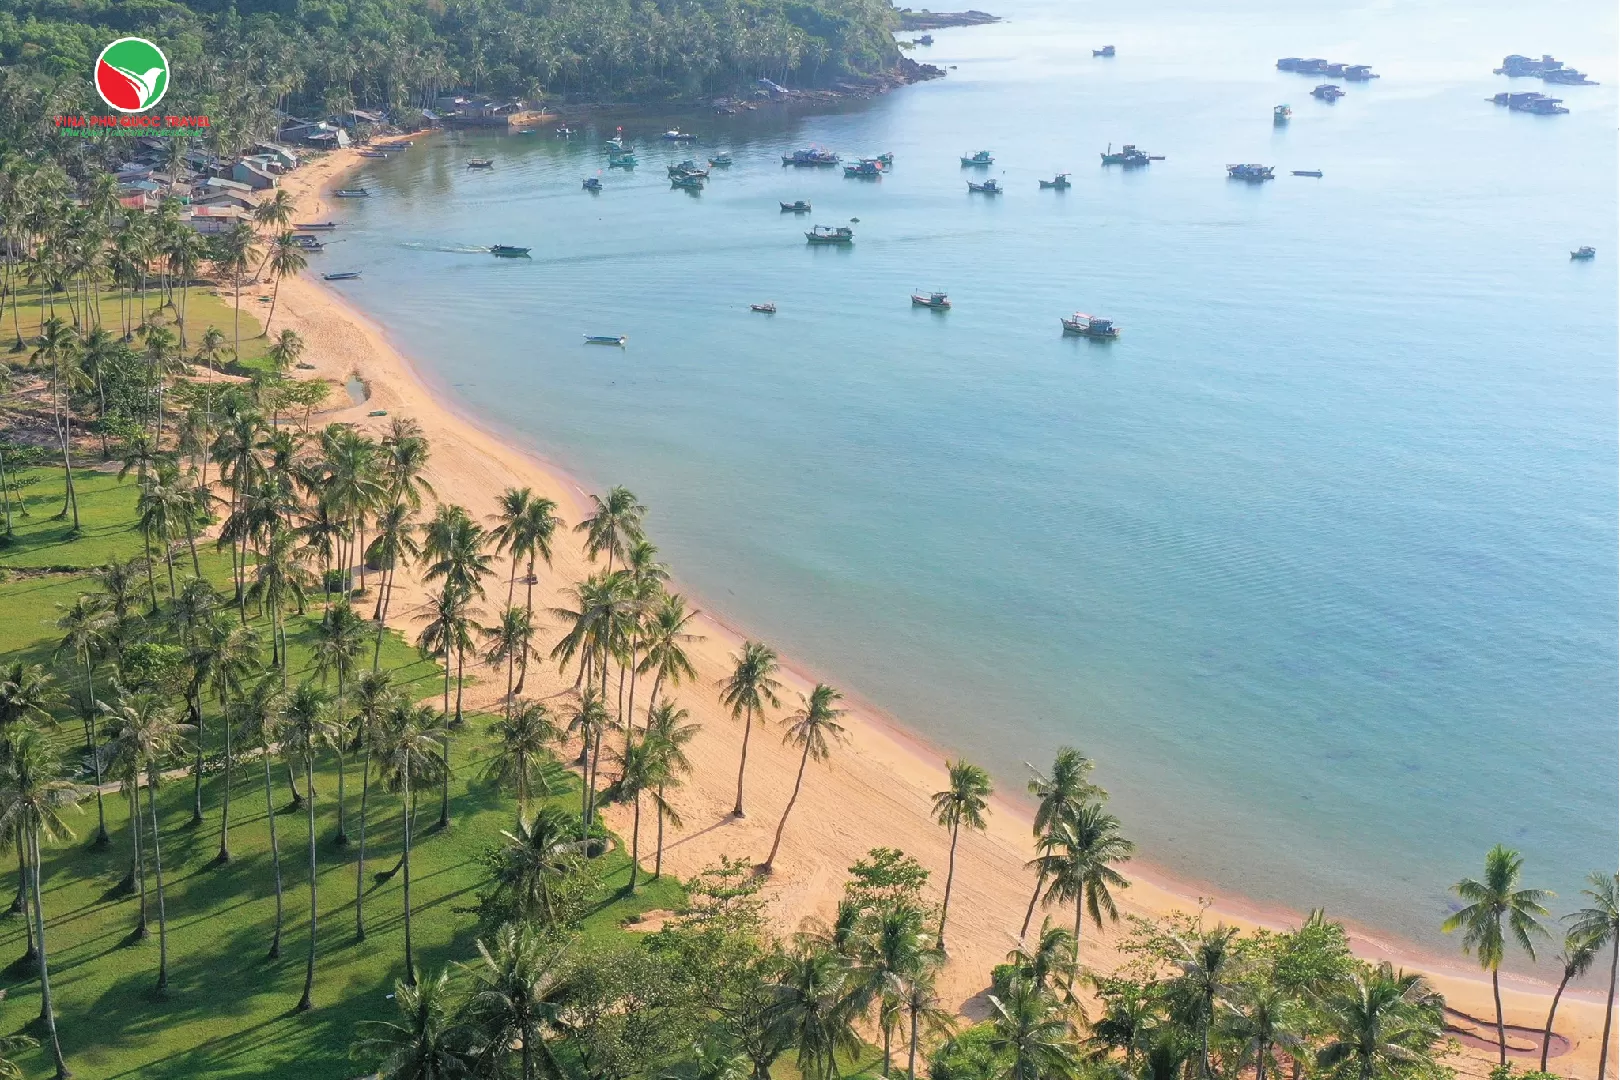 Mediterranean check-in point not to be missed in Phu Quoc